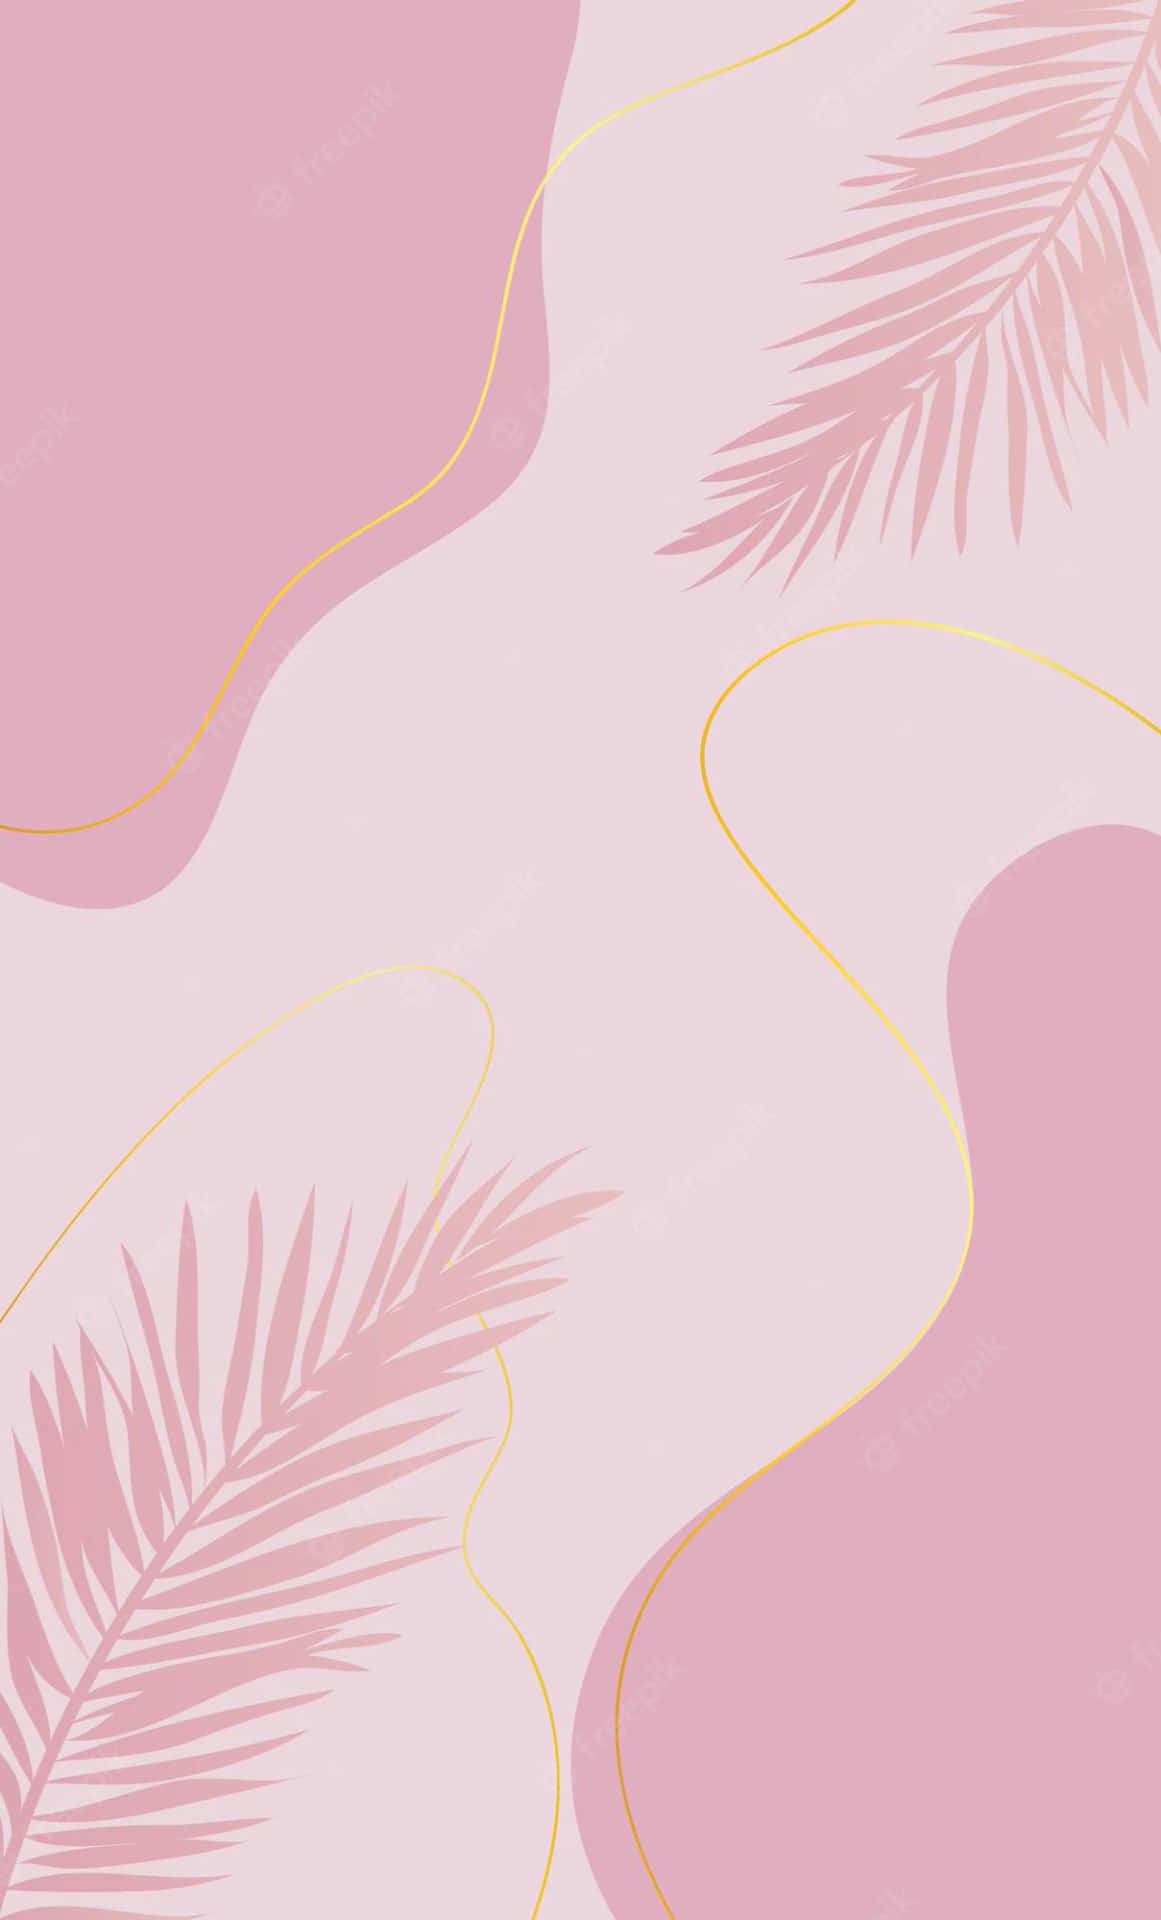 A bright, vibrant display of light pink and gold colors. Wallpaper